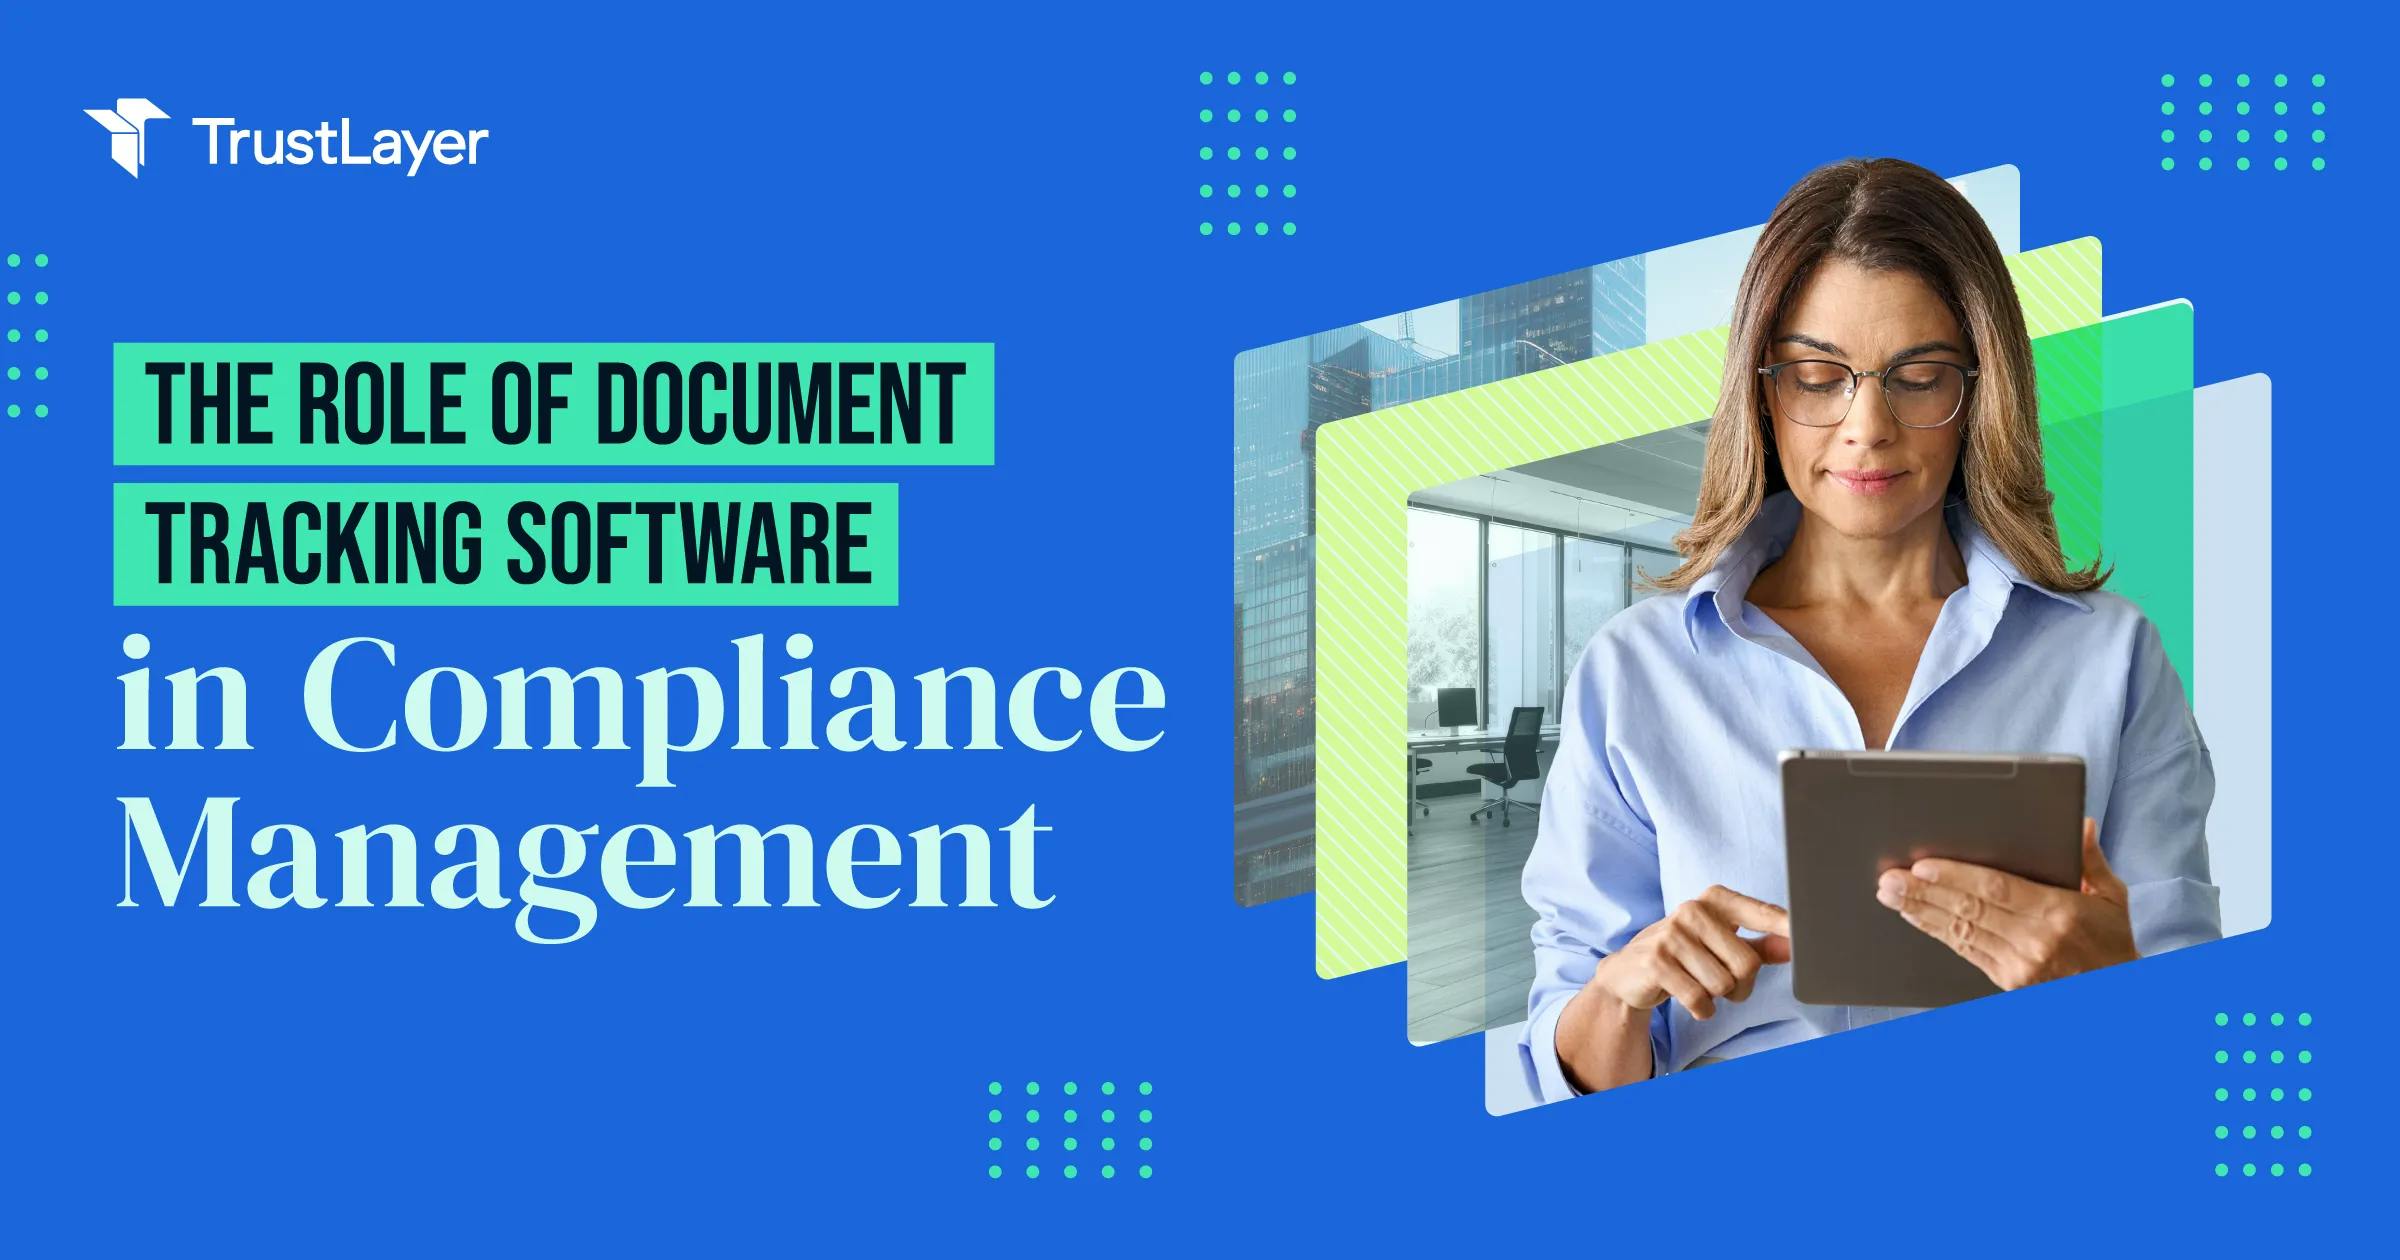 The Role of Document Tracking Software in Compliance Management